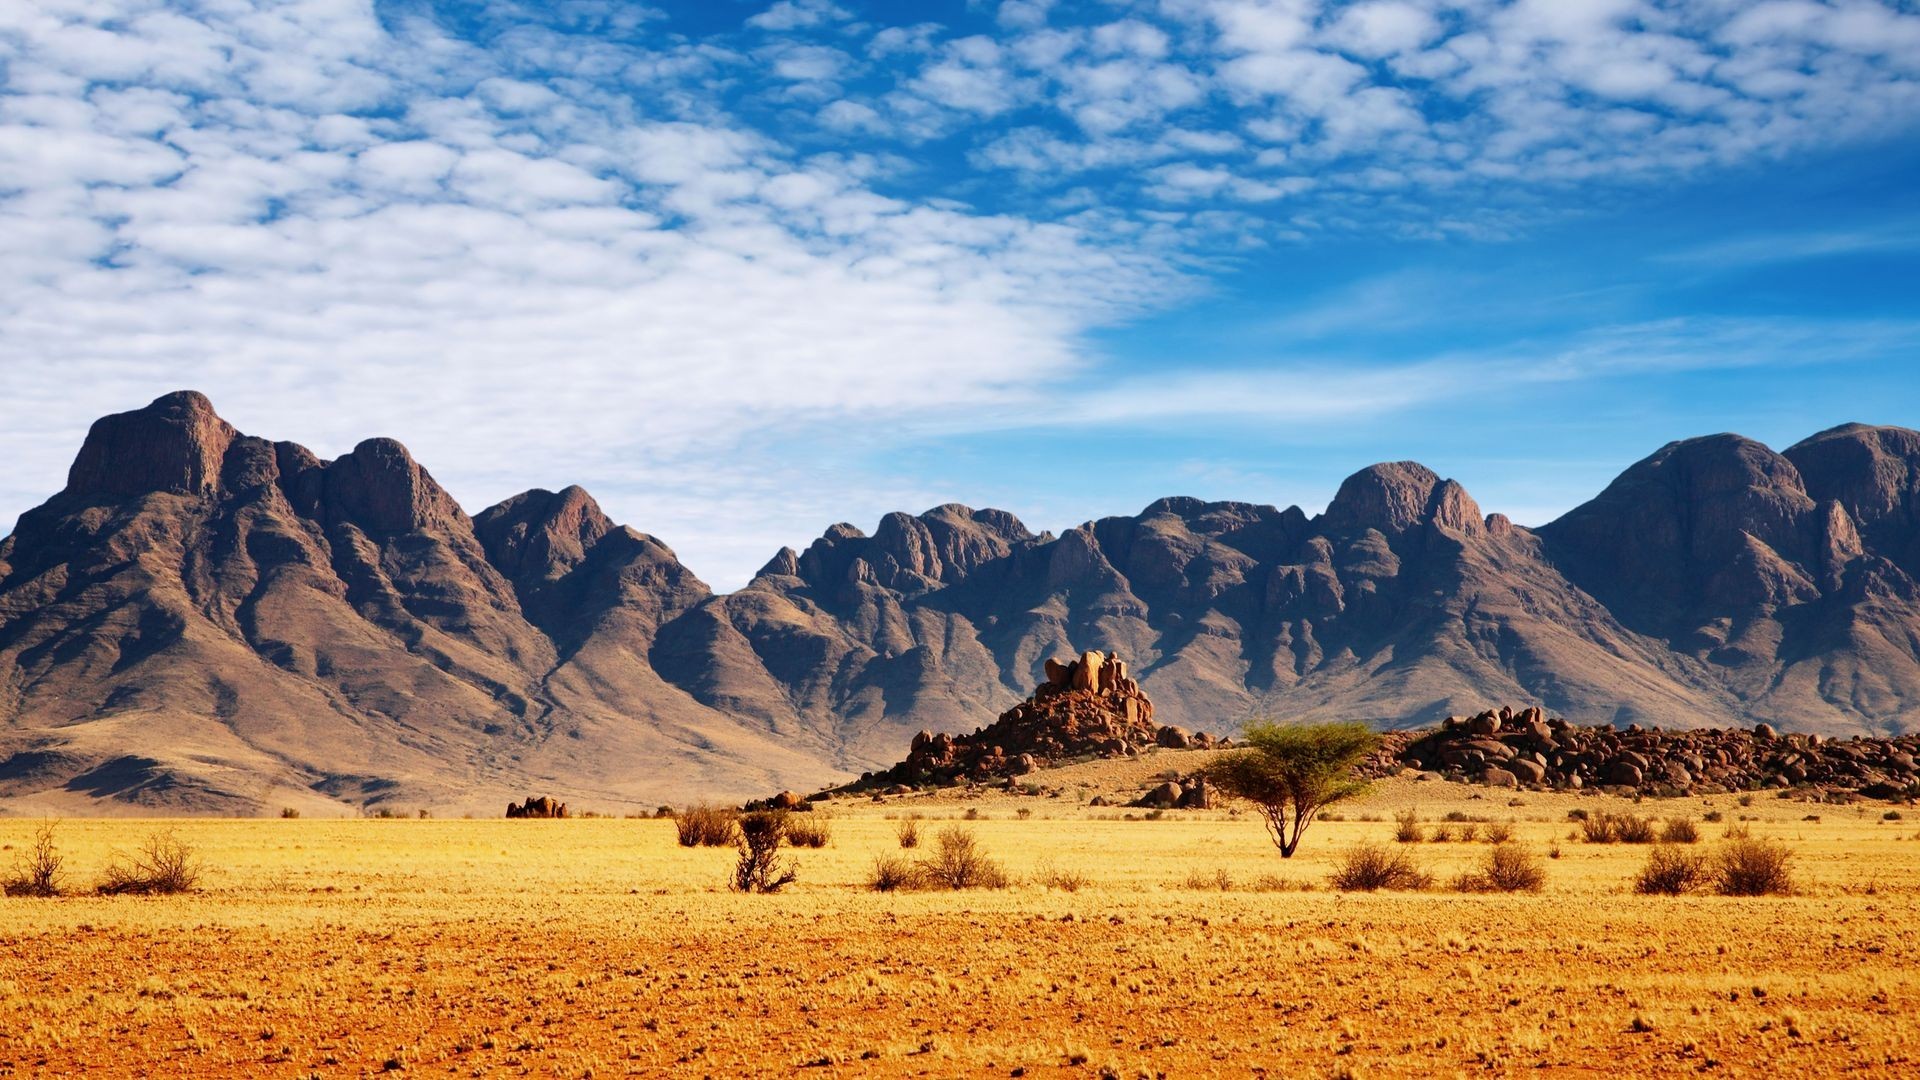 Nature Landscape Mountains Clouds Namibia Africa Desert Rock Trees Stones Plants 1920x1080